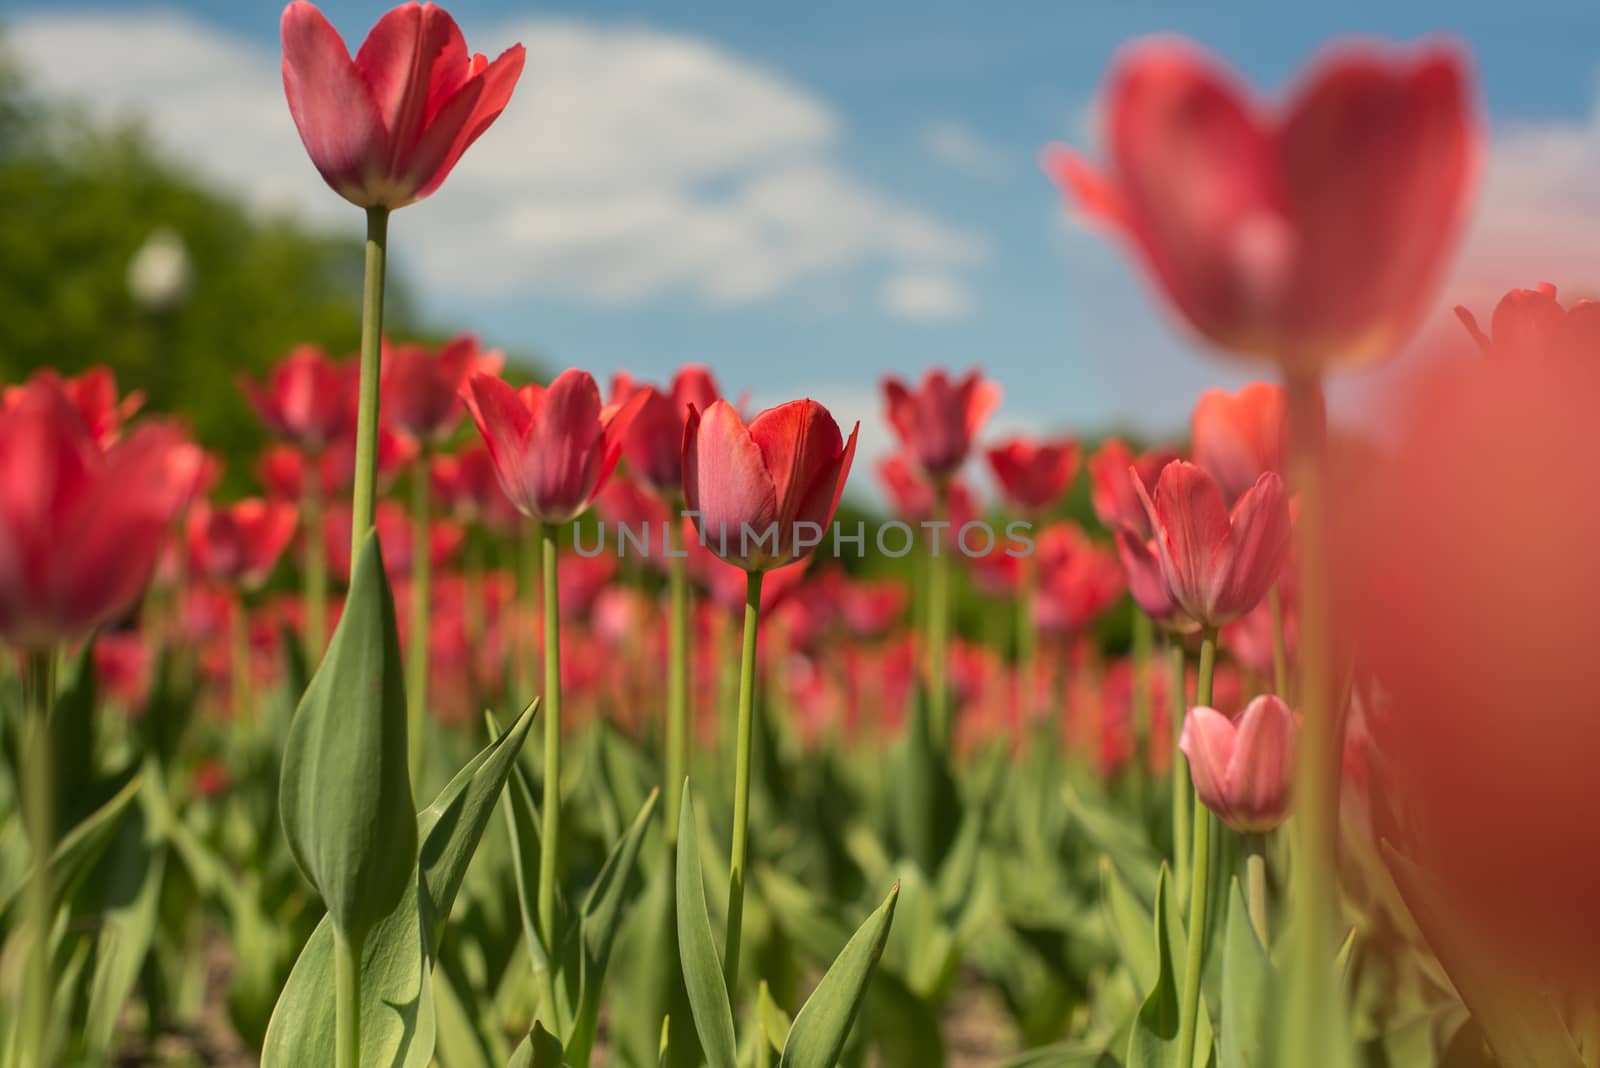 Group of red tulips flower in the park. Spring blurred background.